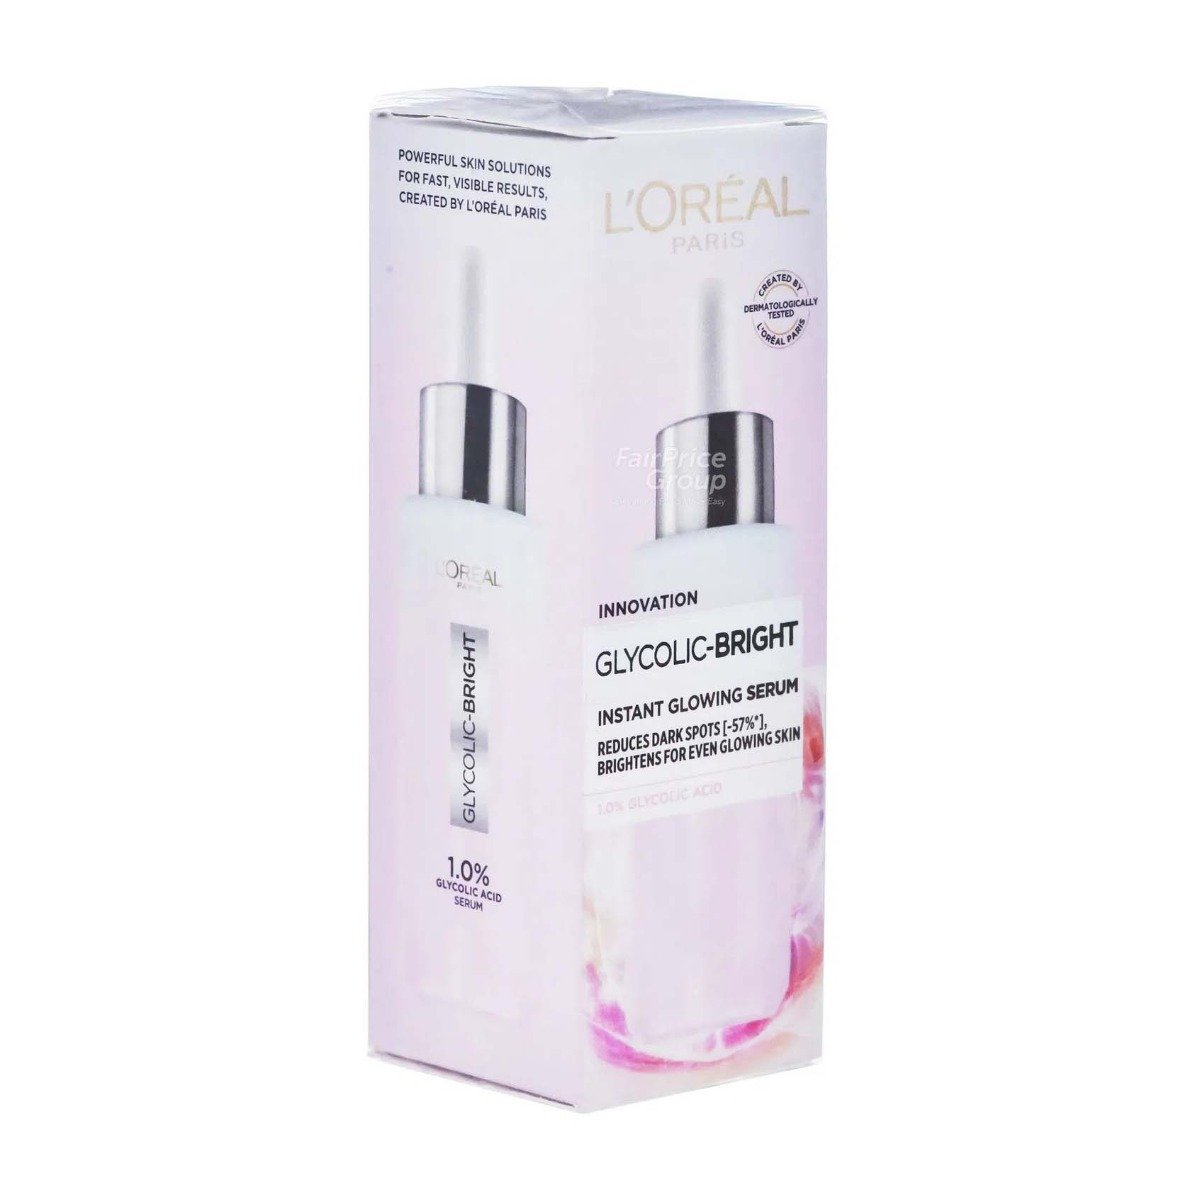 L'Oreal Glycolic-Bright Instant Glowing Serum - 30ml - Bloom Pharmacy